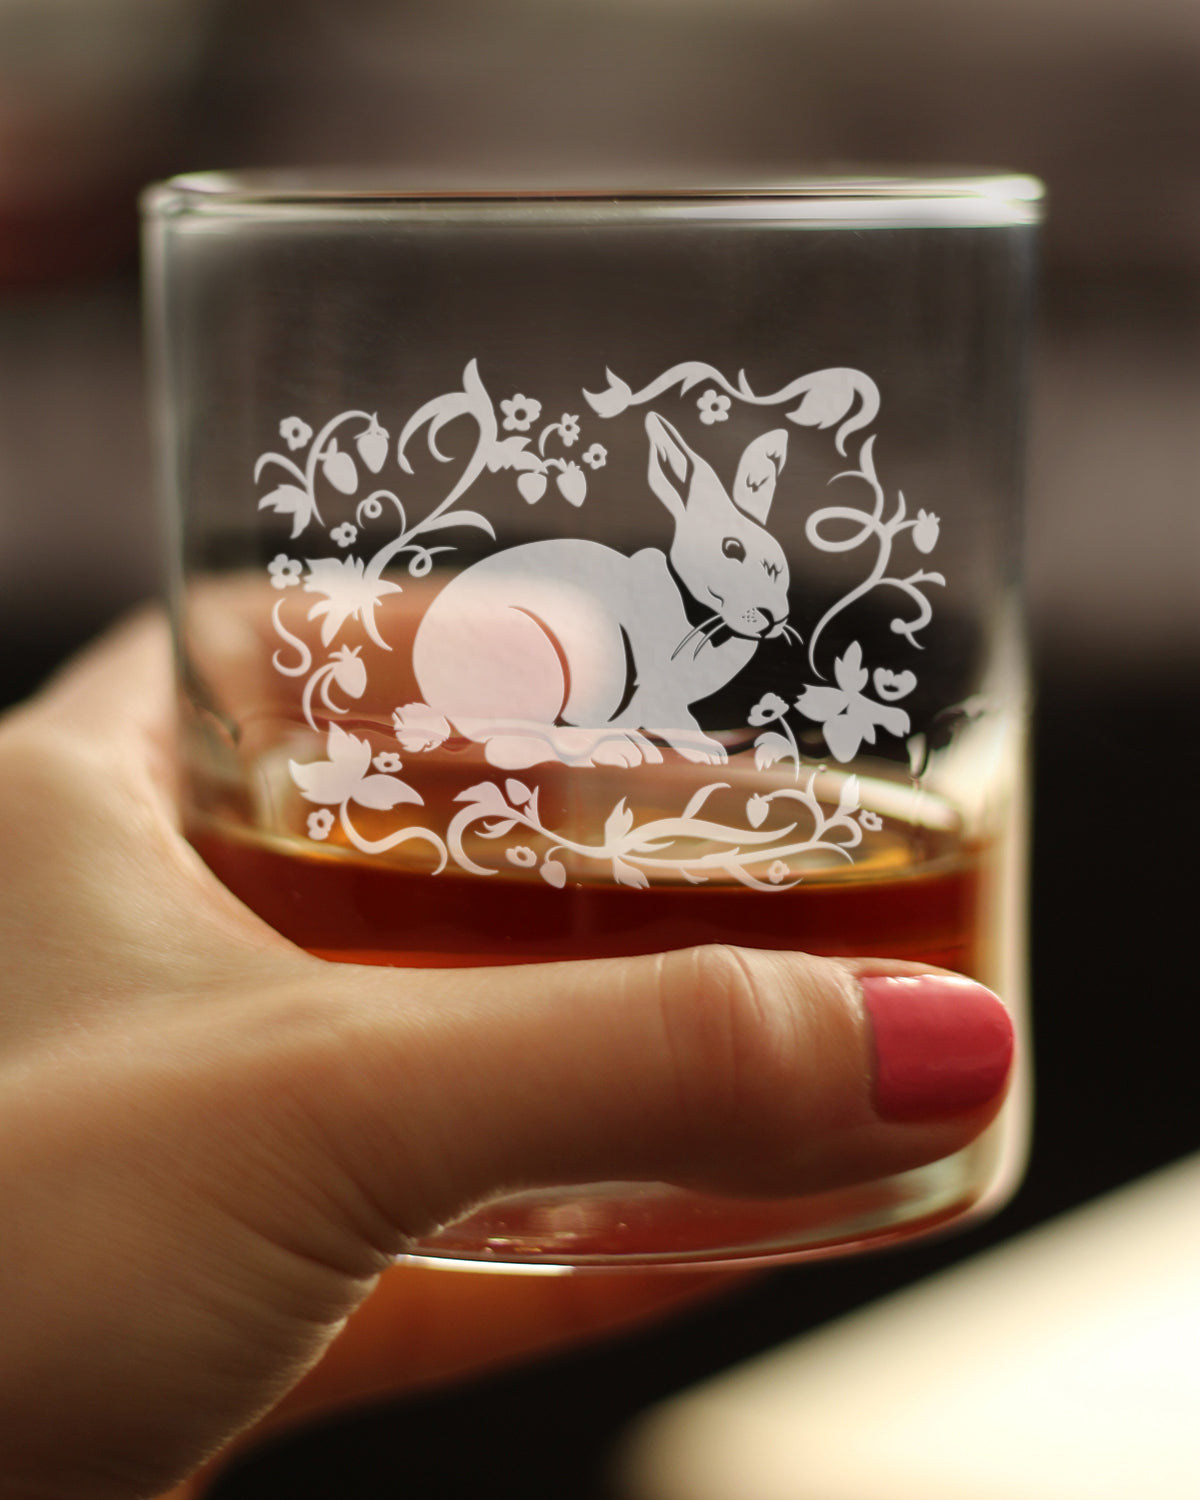 Berry Patch Bunny Rabbit - Whiskey Rocks Glass - Hand Engraved Gifts for Men &amp; Women That Love Bunnies